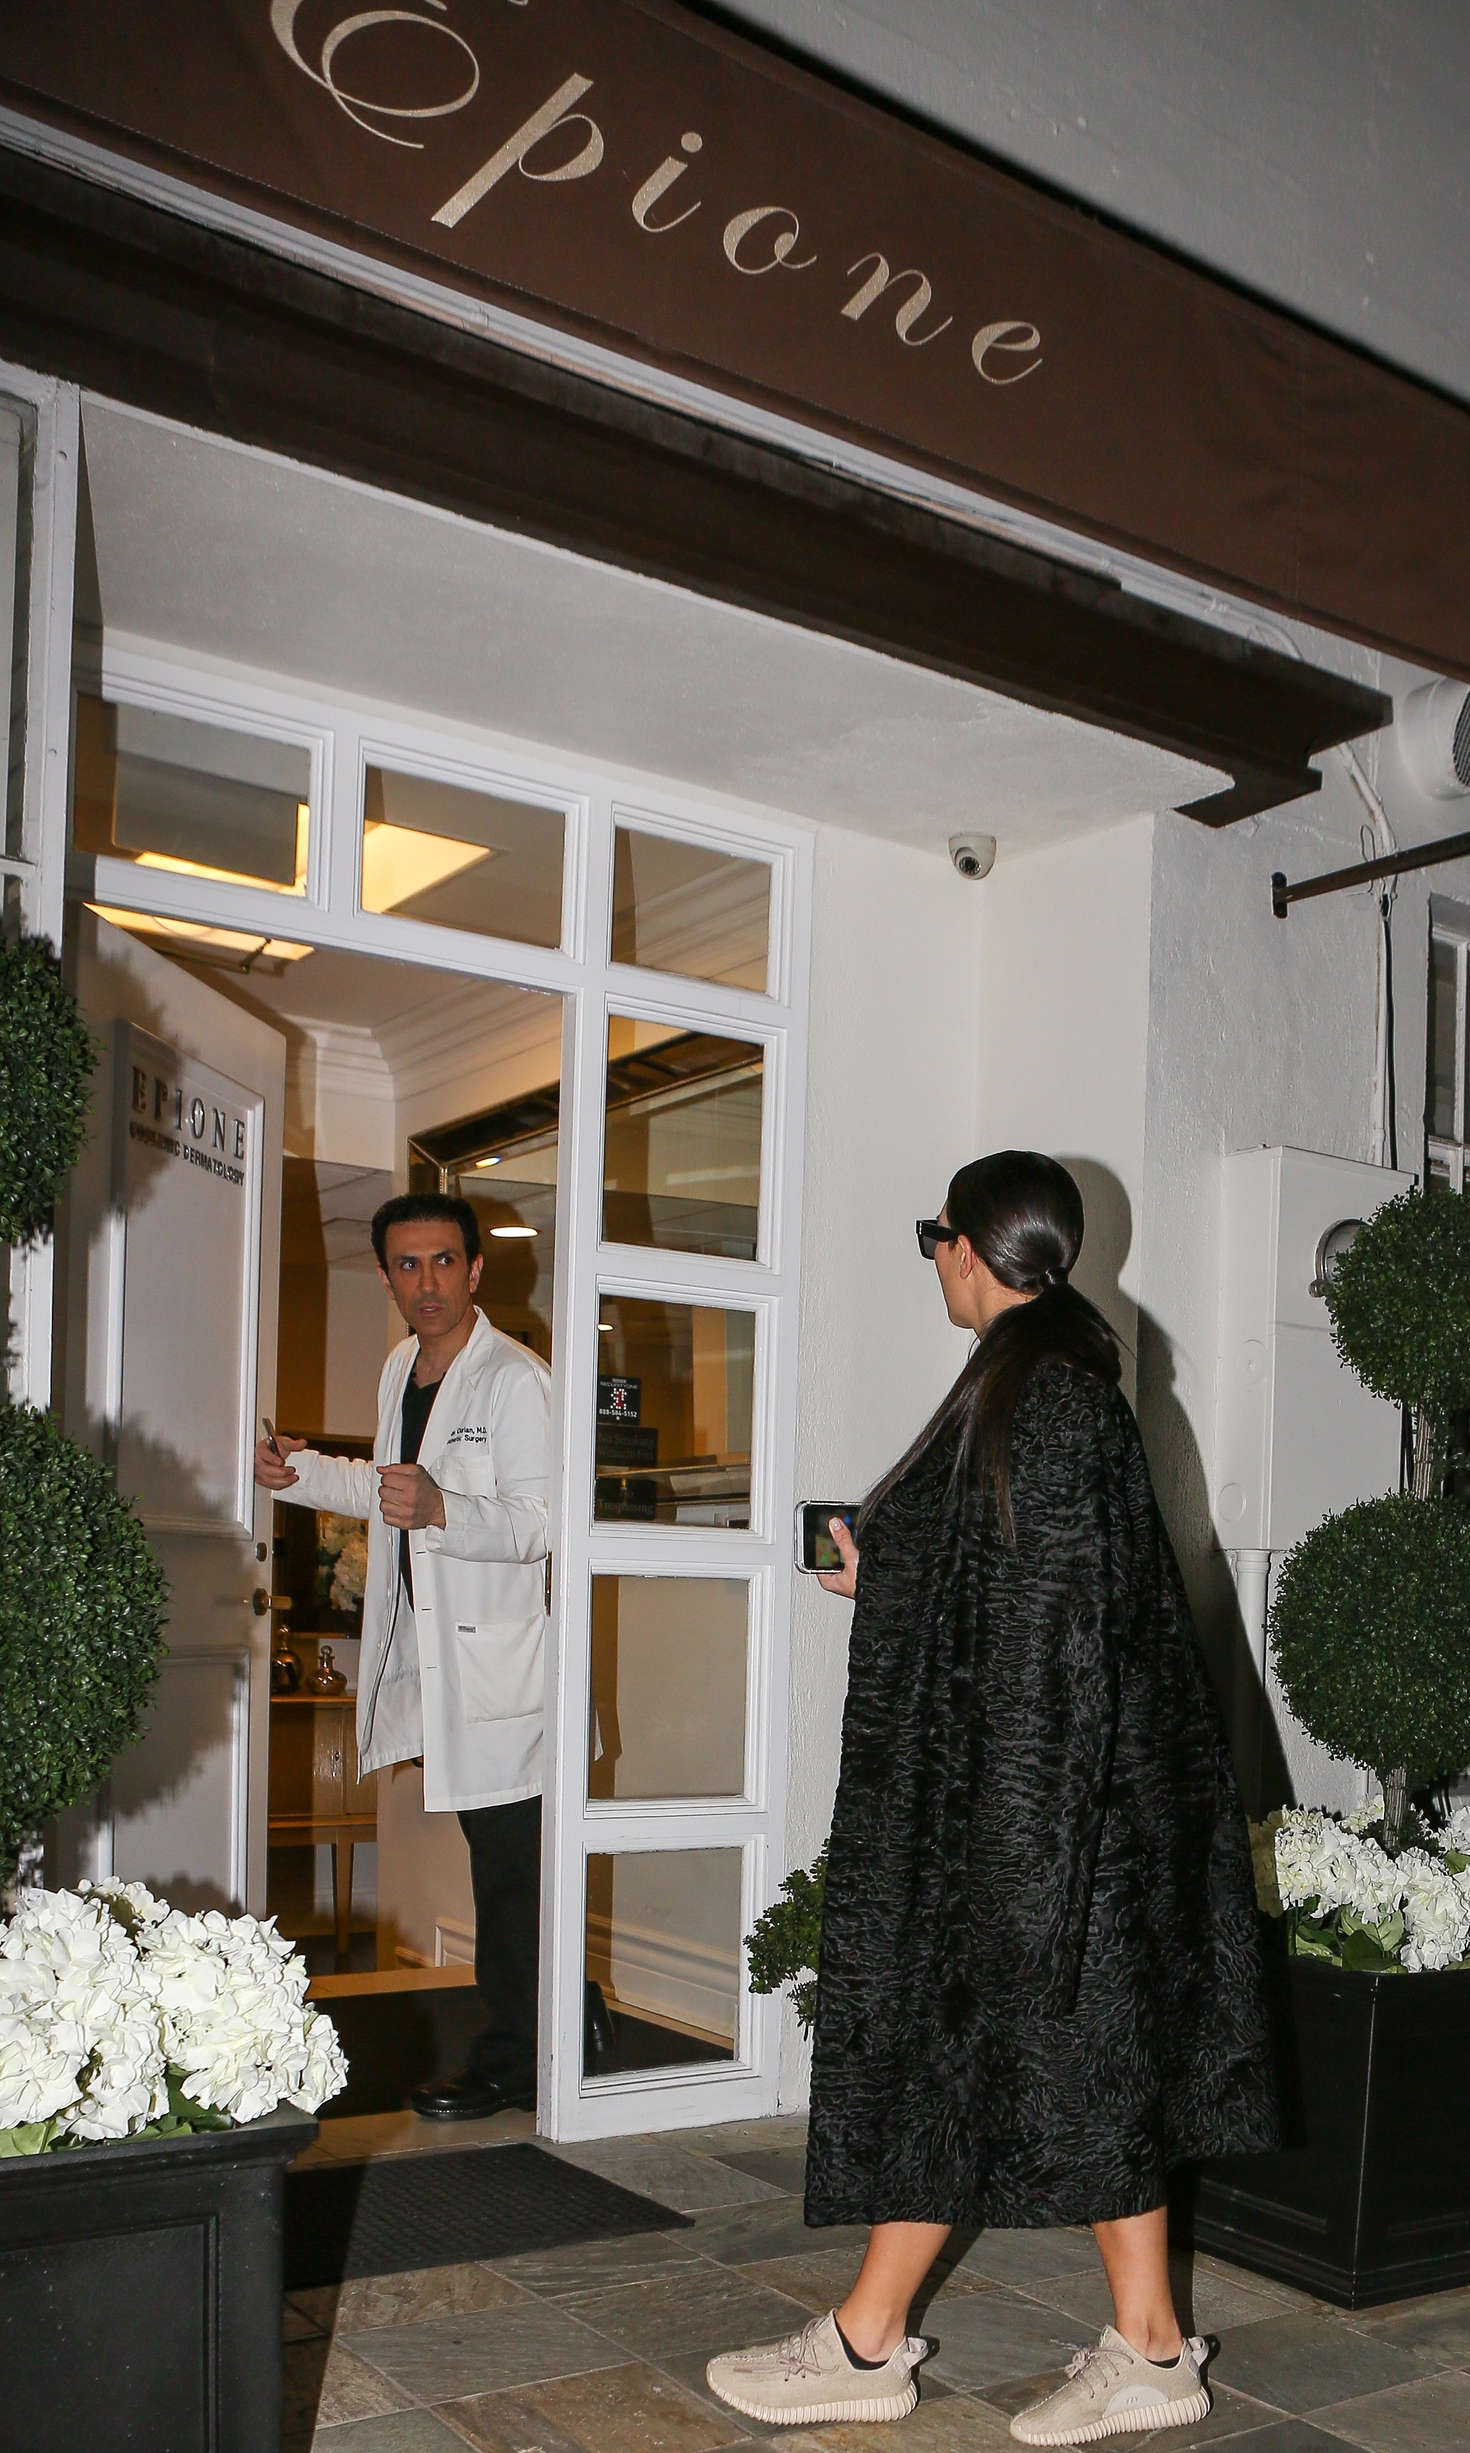 Kim Kardashian at her favorite Cosmetic Center in Beverly Hills